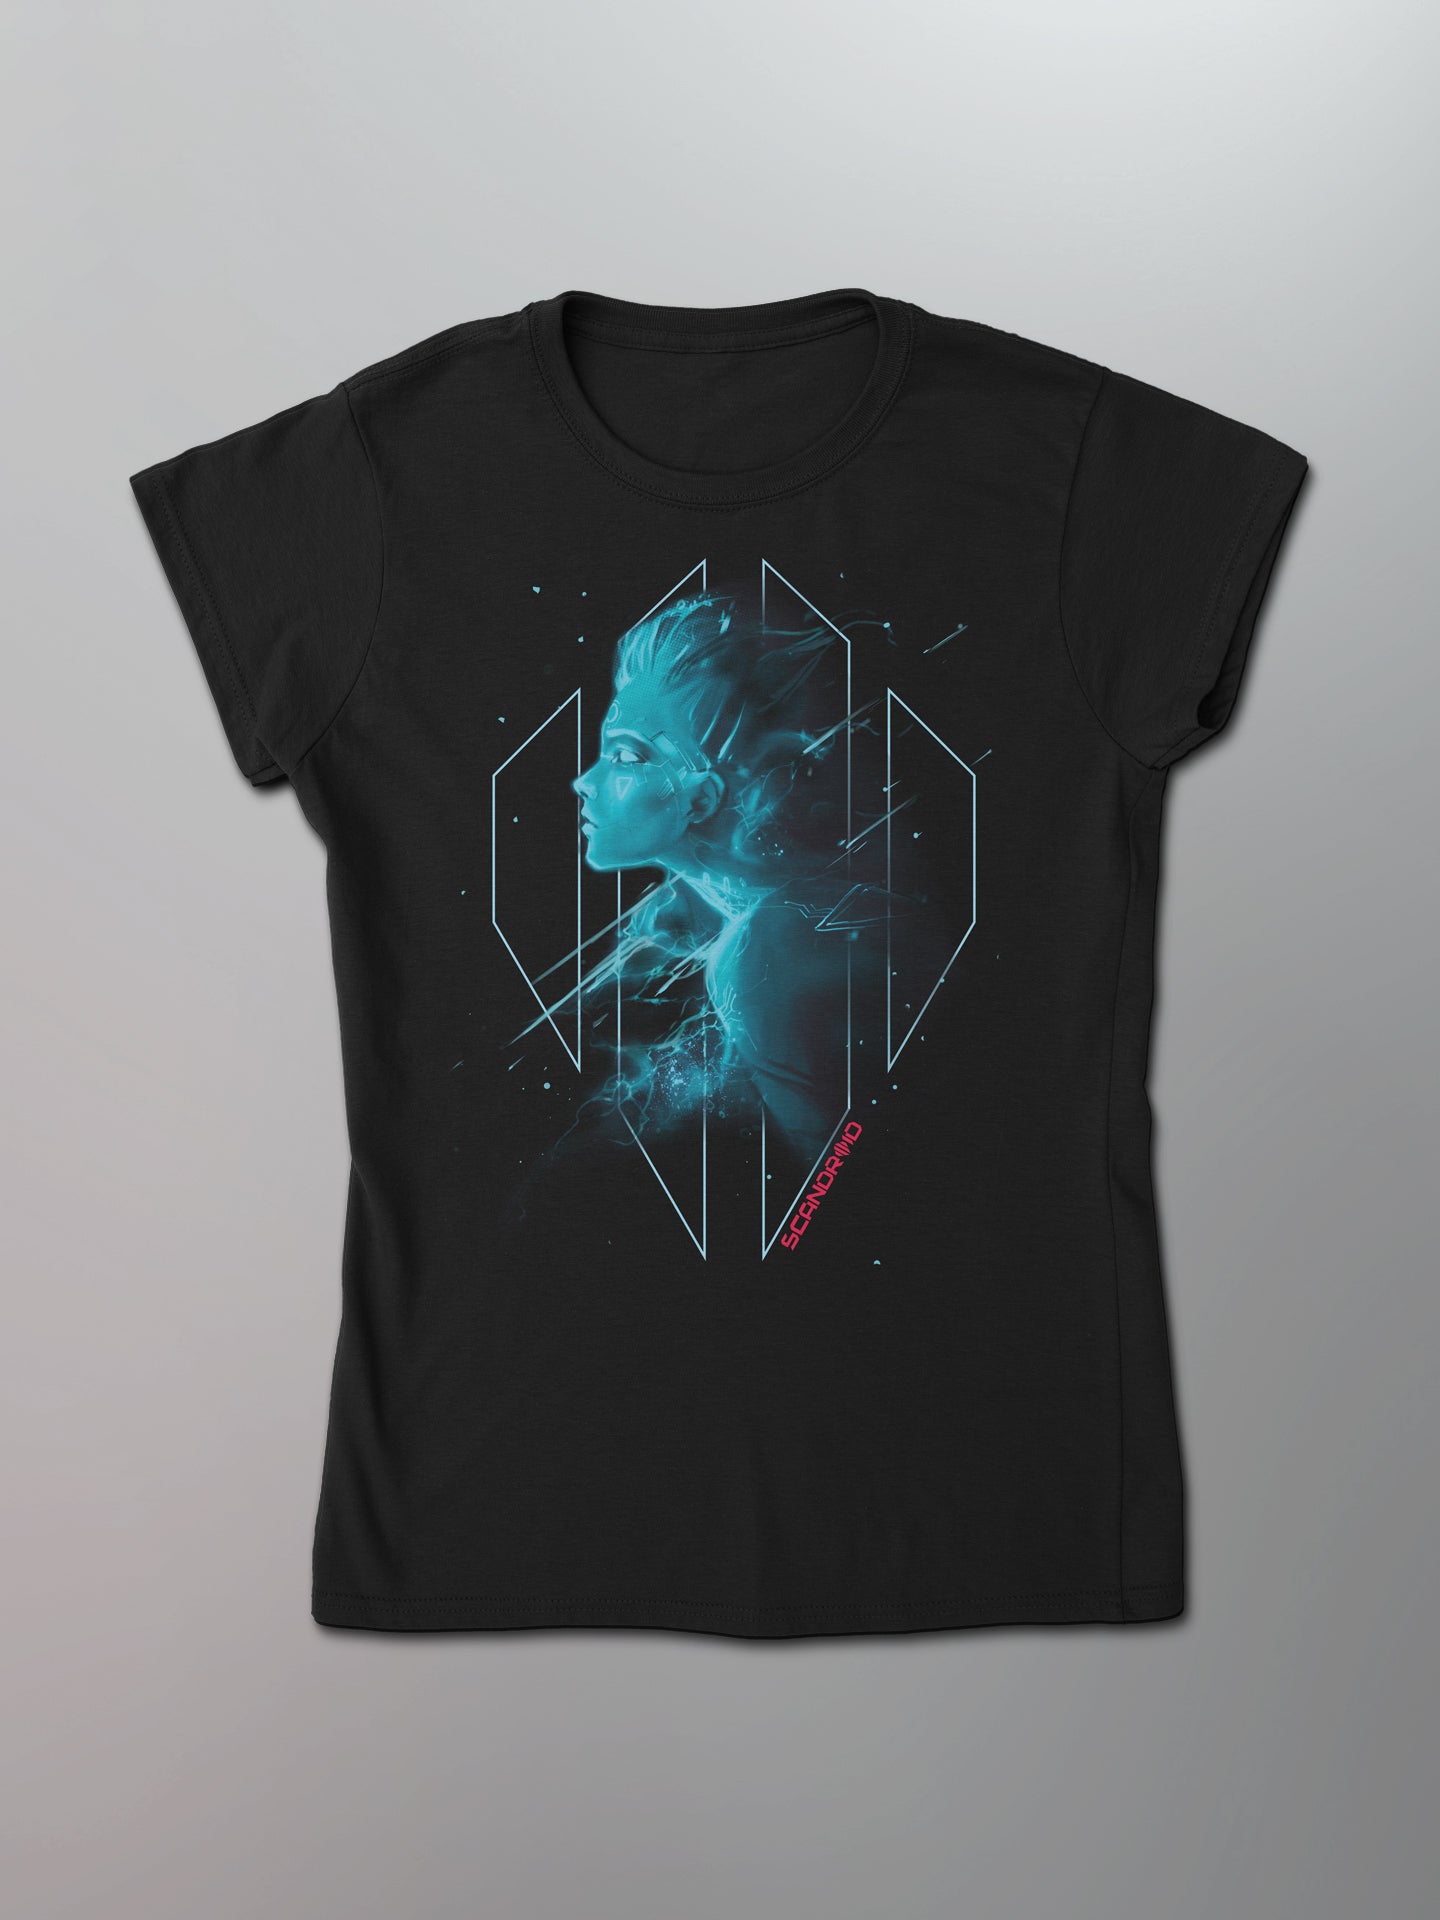 Scandroid - Visions Women's Shirt